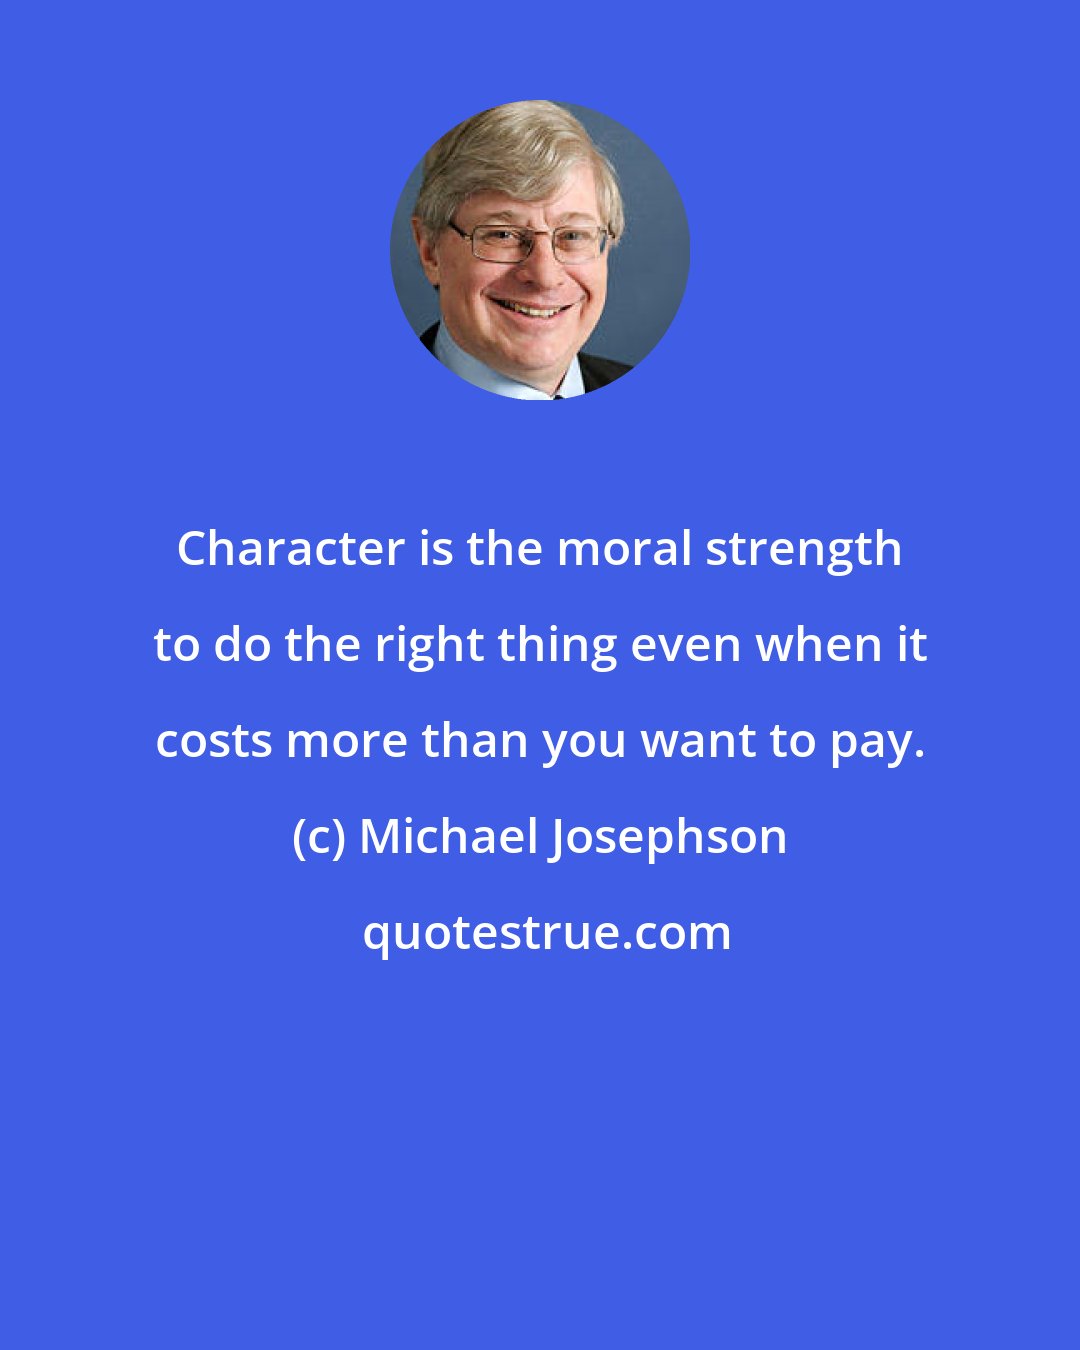 Michael Josephson: Character is the moral strength to do the right thing even when it costs more than you want to pay.